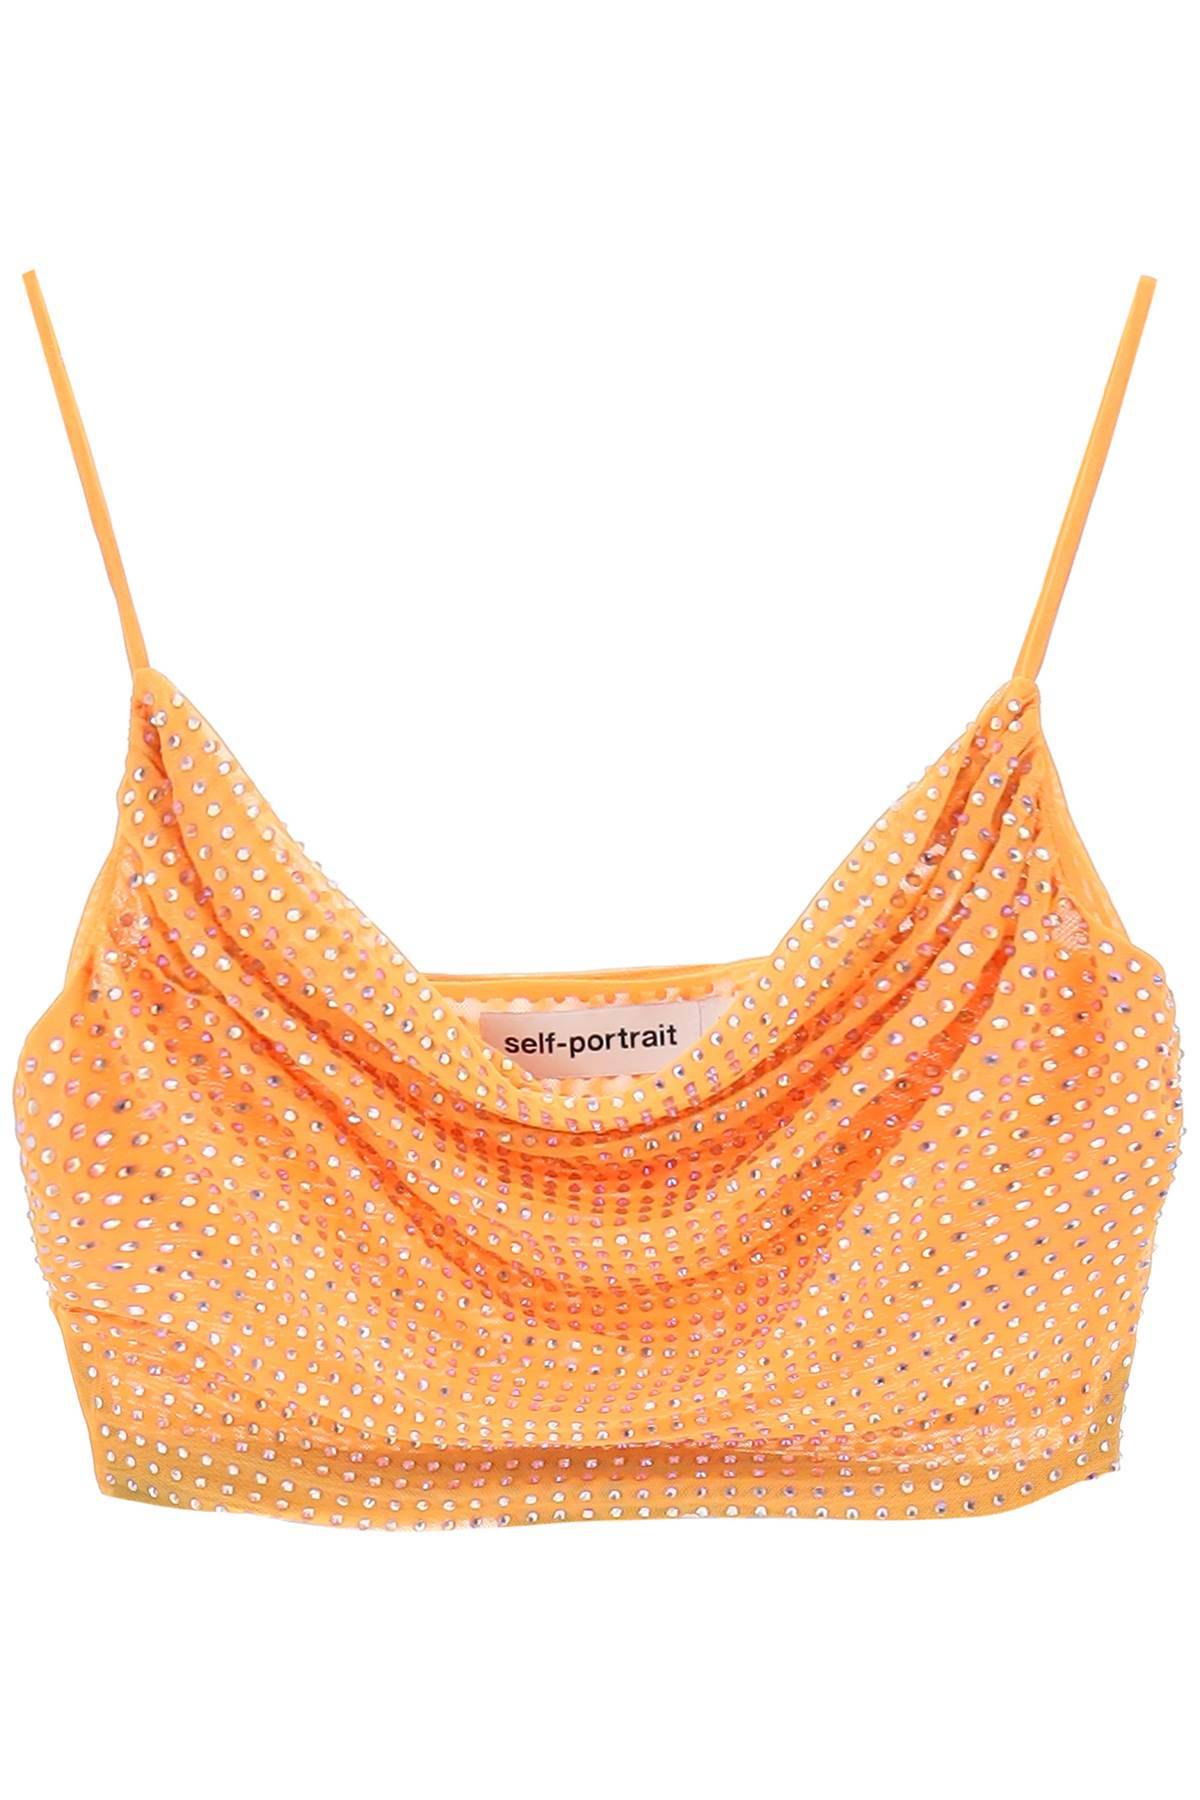 Shop Self-portrait Cropped Top In Mesh With Rhinestones All-over In Orange